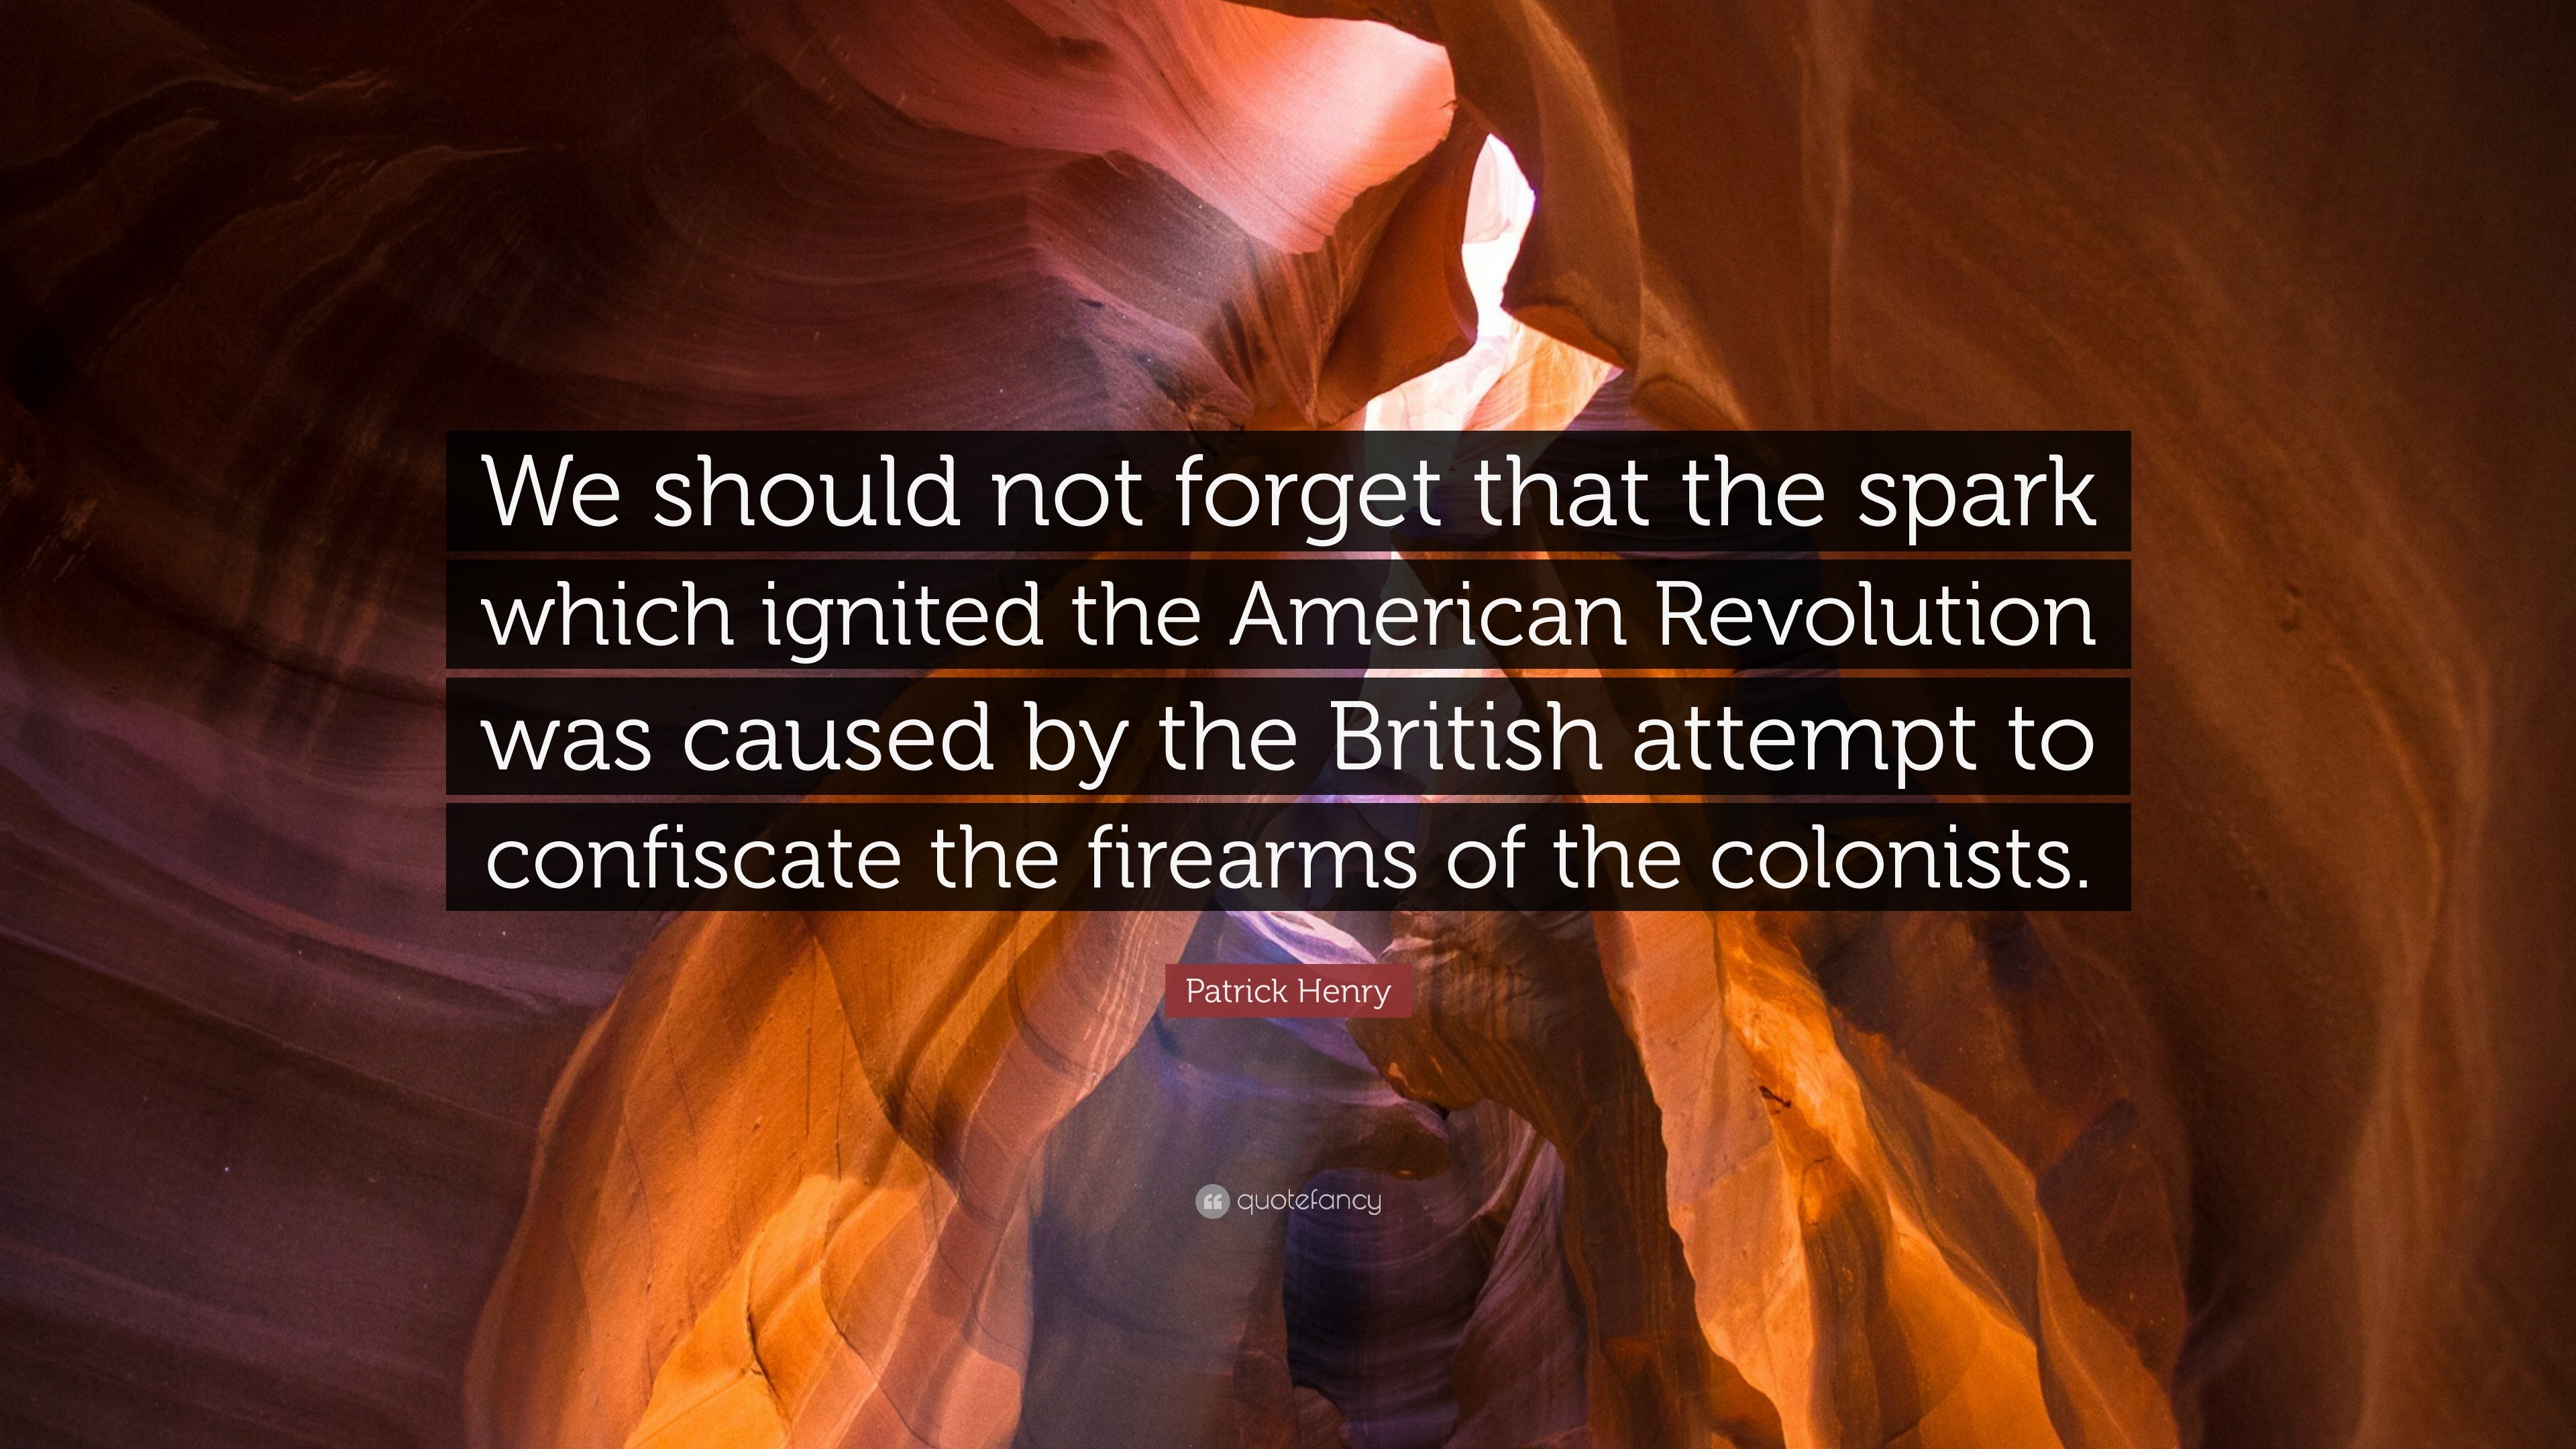 Patrick Henry Quote: “We should not forget that the spark which ignited the American Revolution was caused by the British attempt to confiscat...”